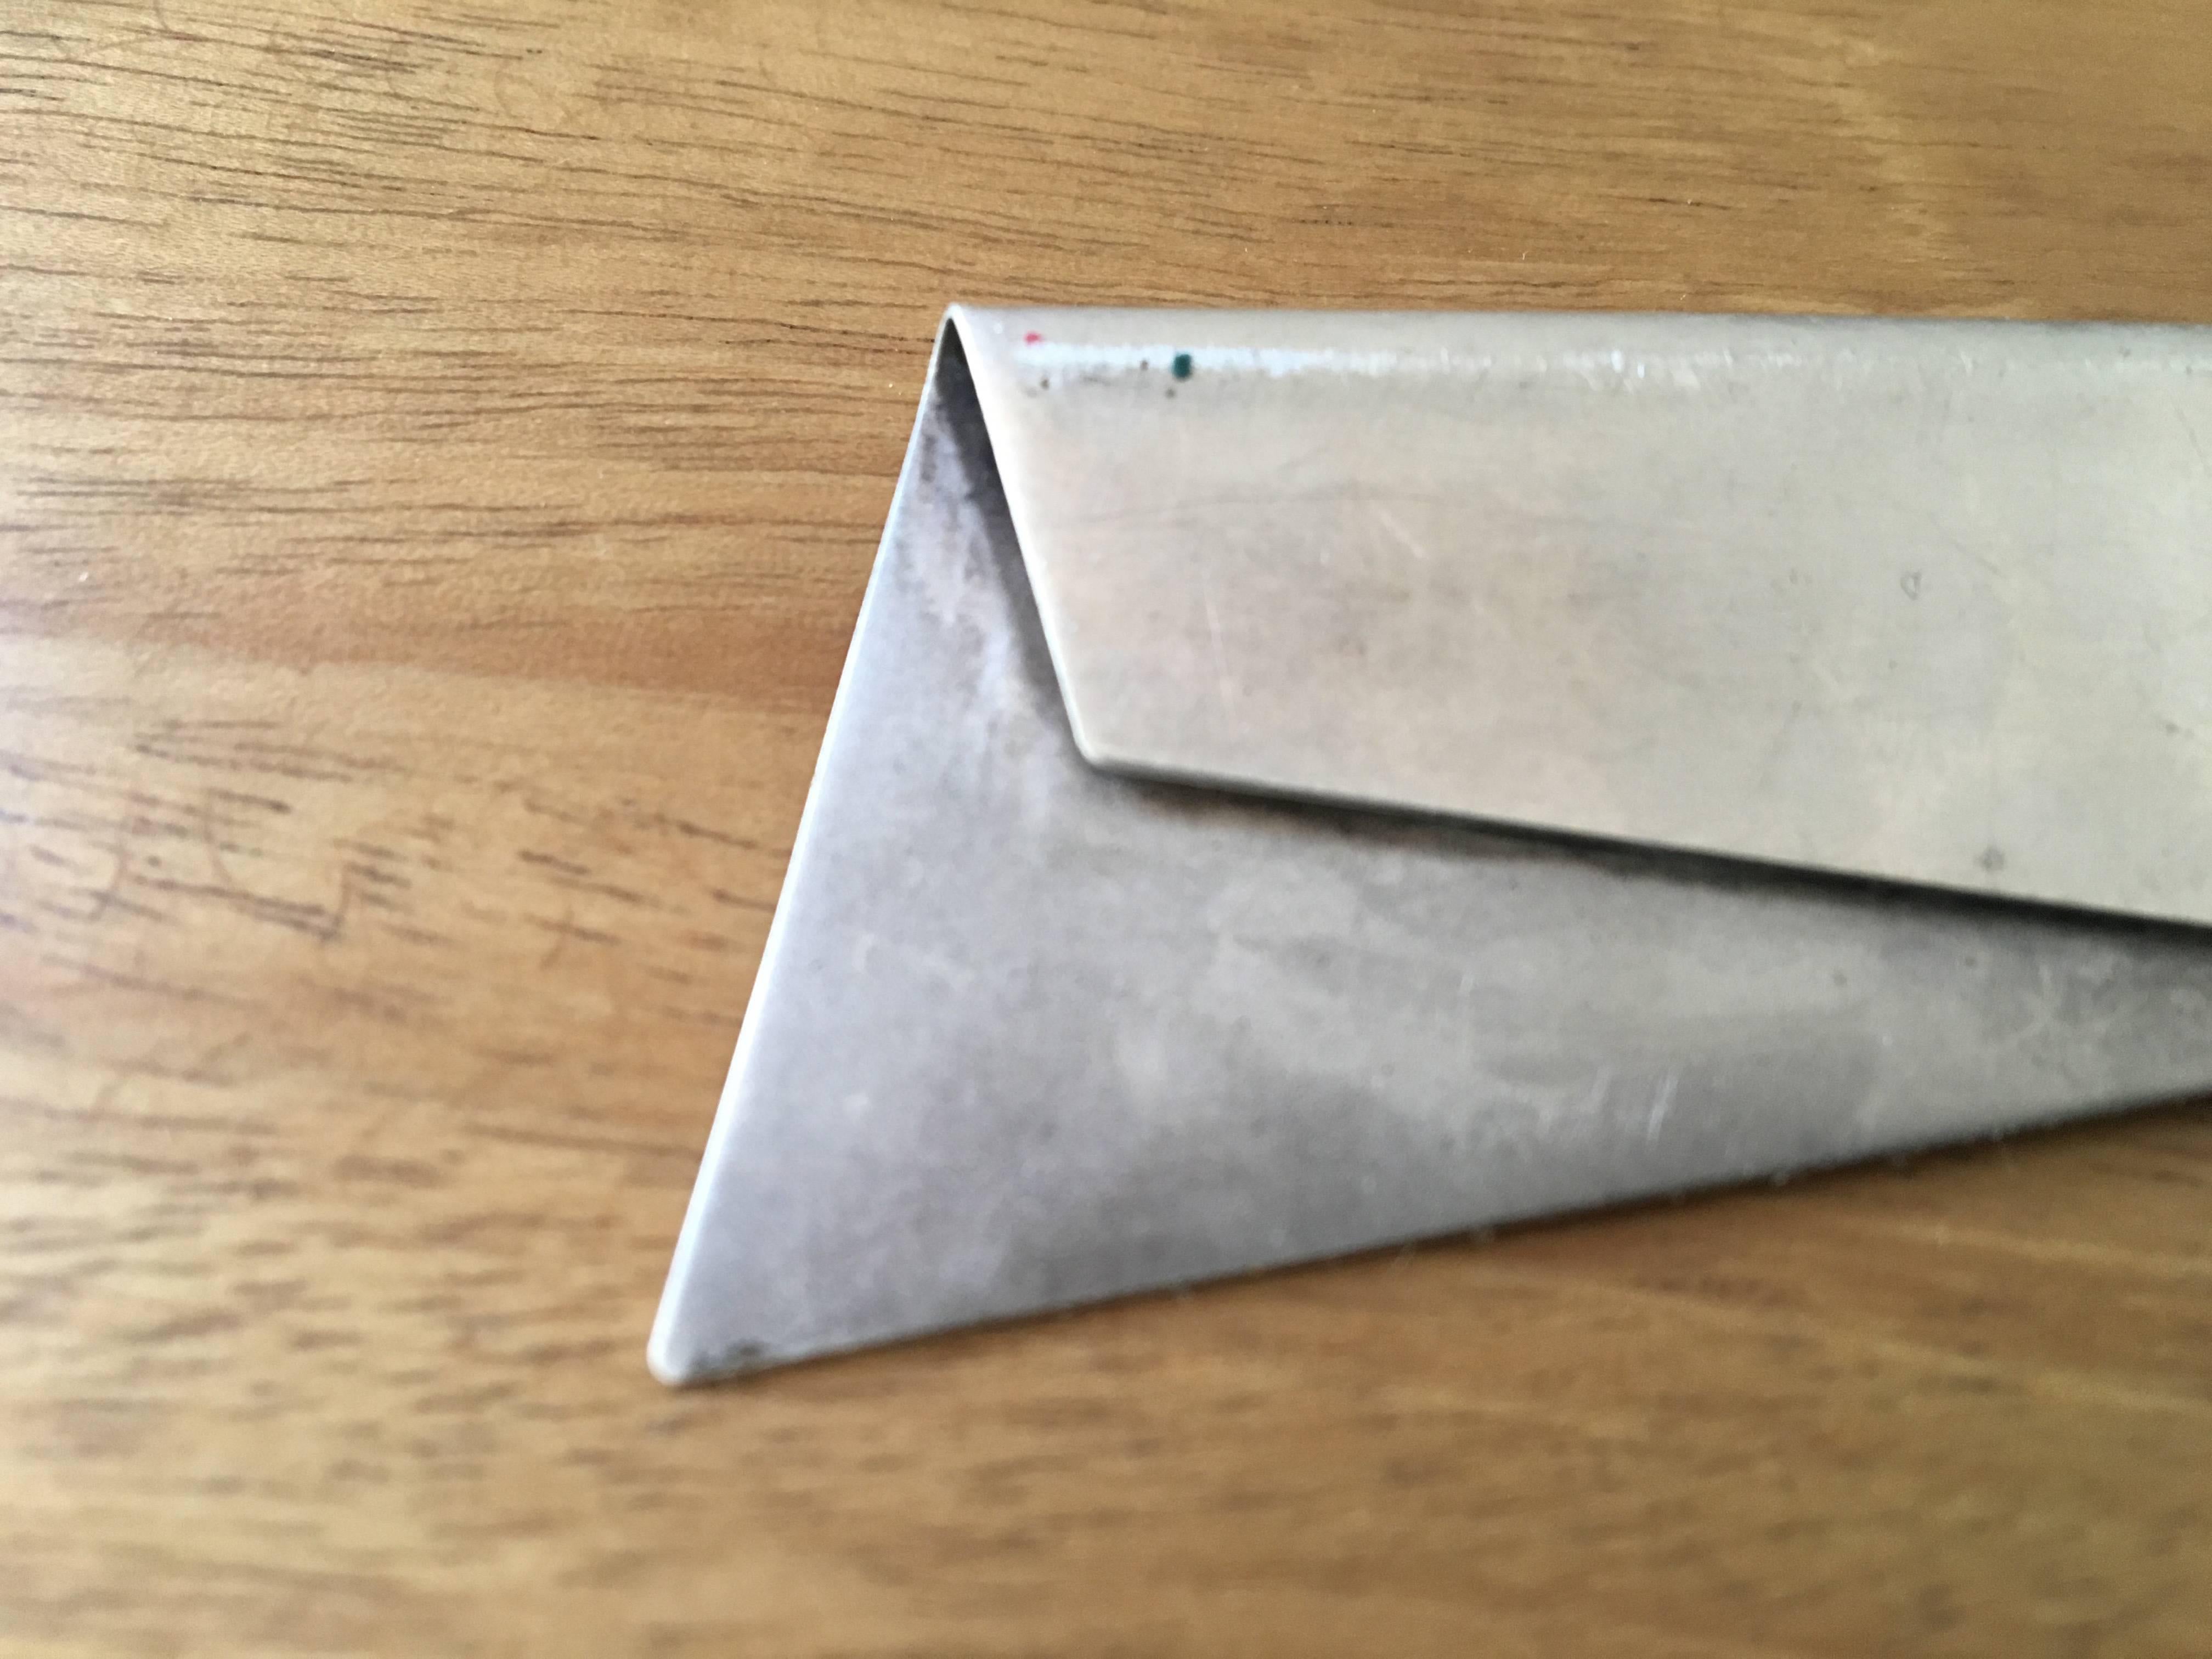 Folded sterling silver brooch. Signature is illegible.